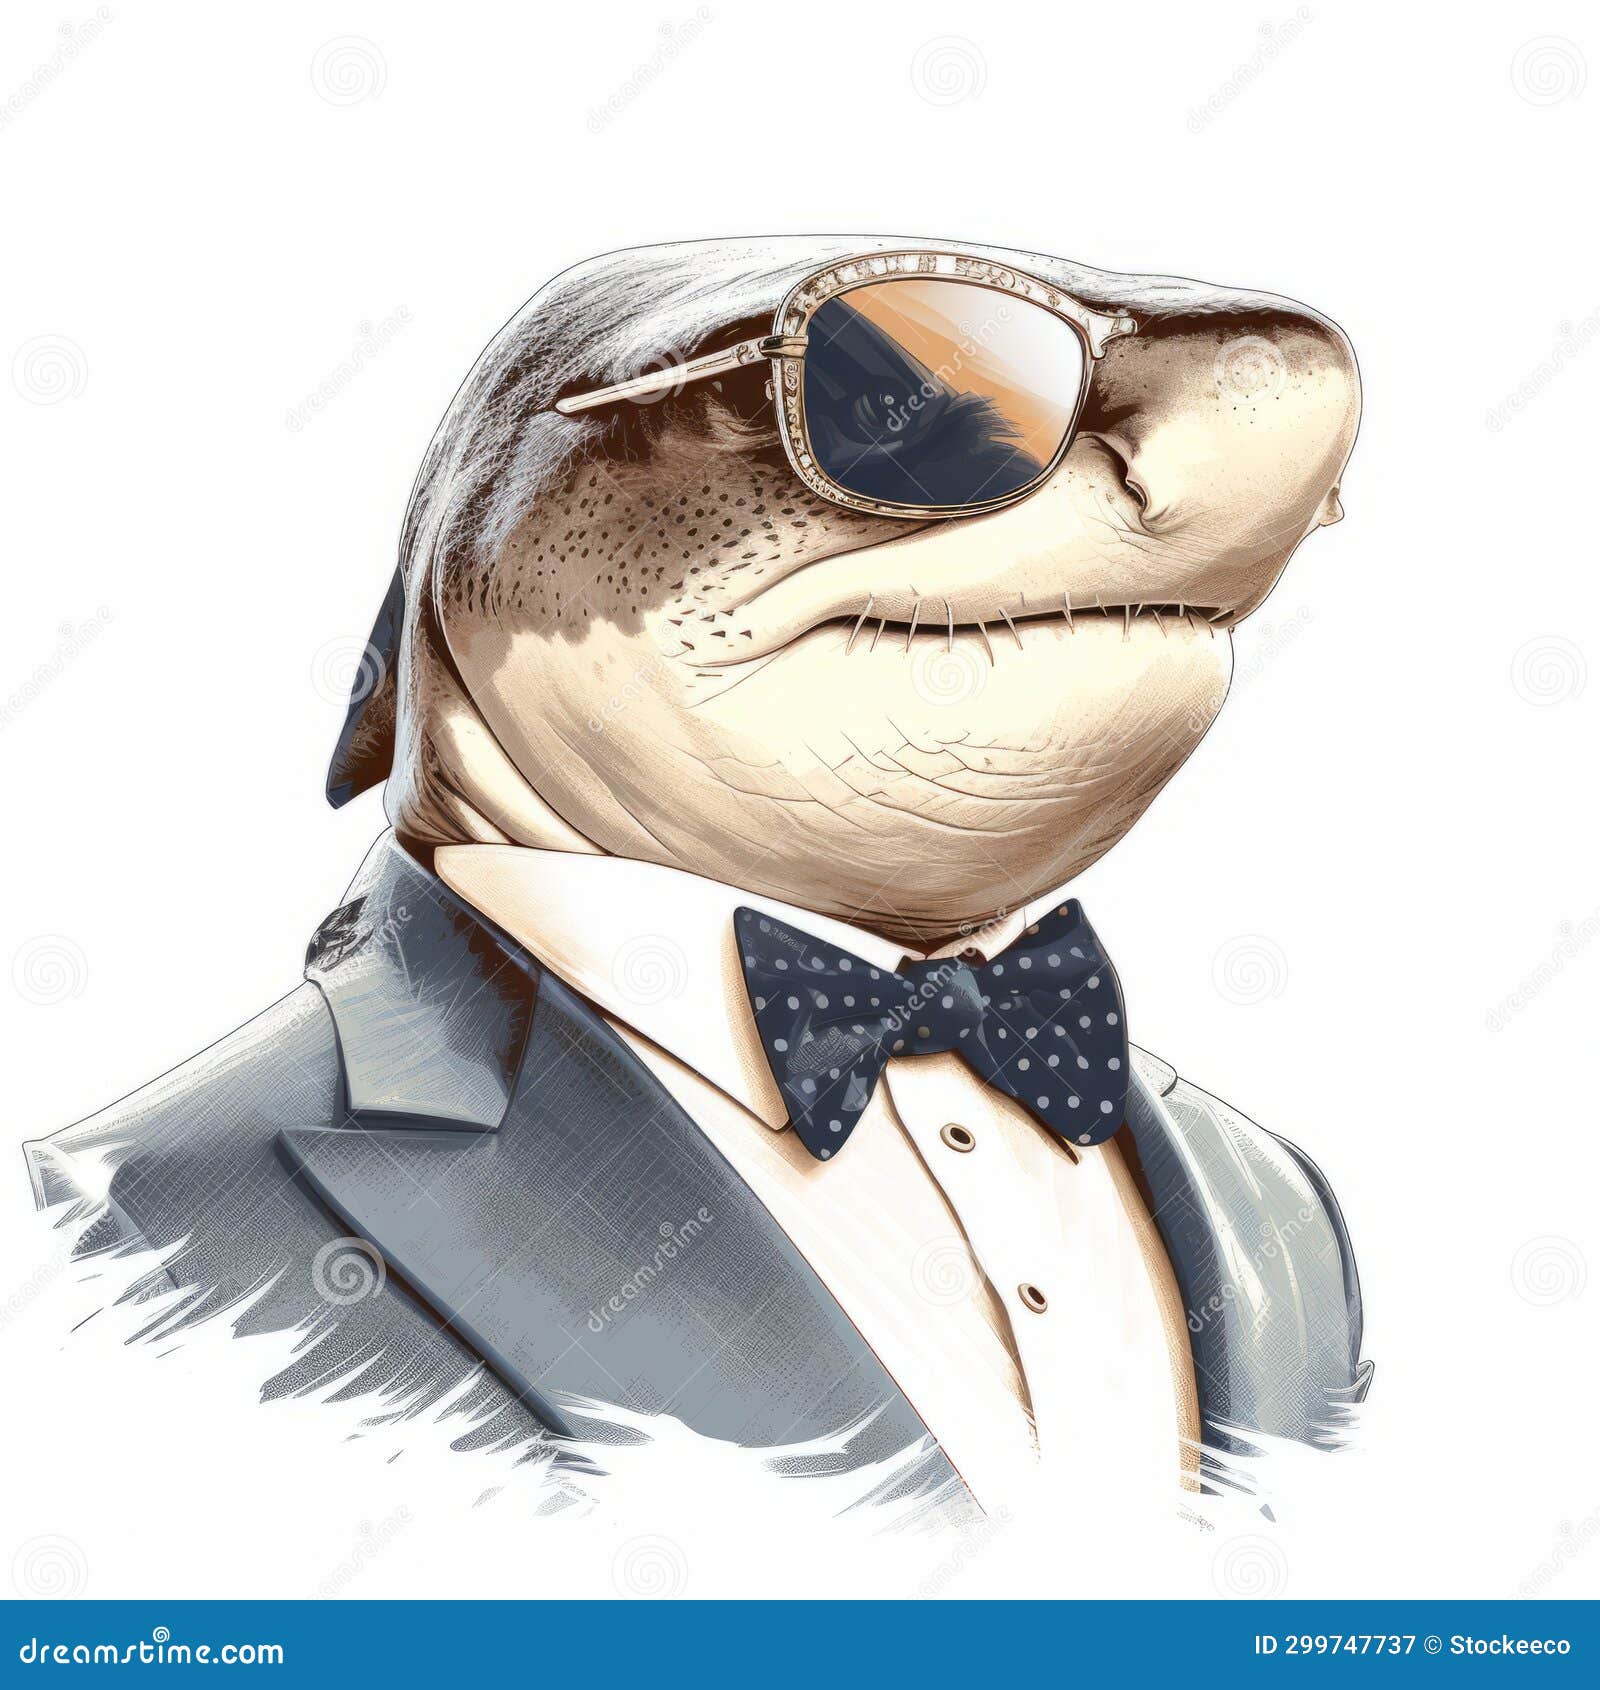 streetwise shark: a stylish and saturated portrait of a shark in a suit